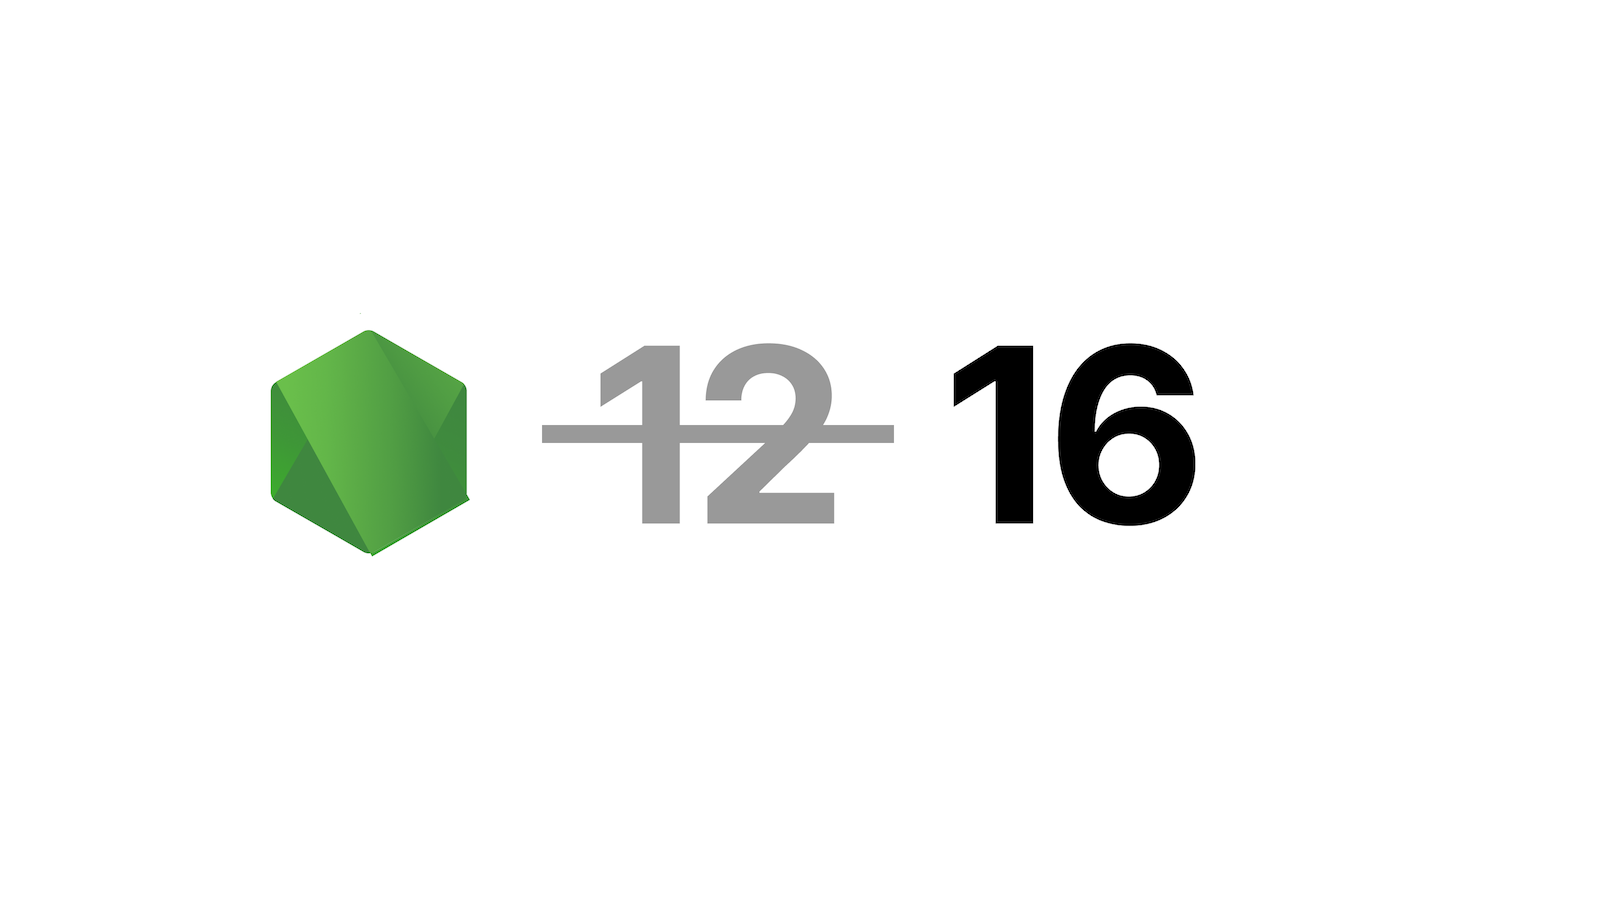 Cover for Node.js 12 is being deprecated